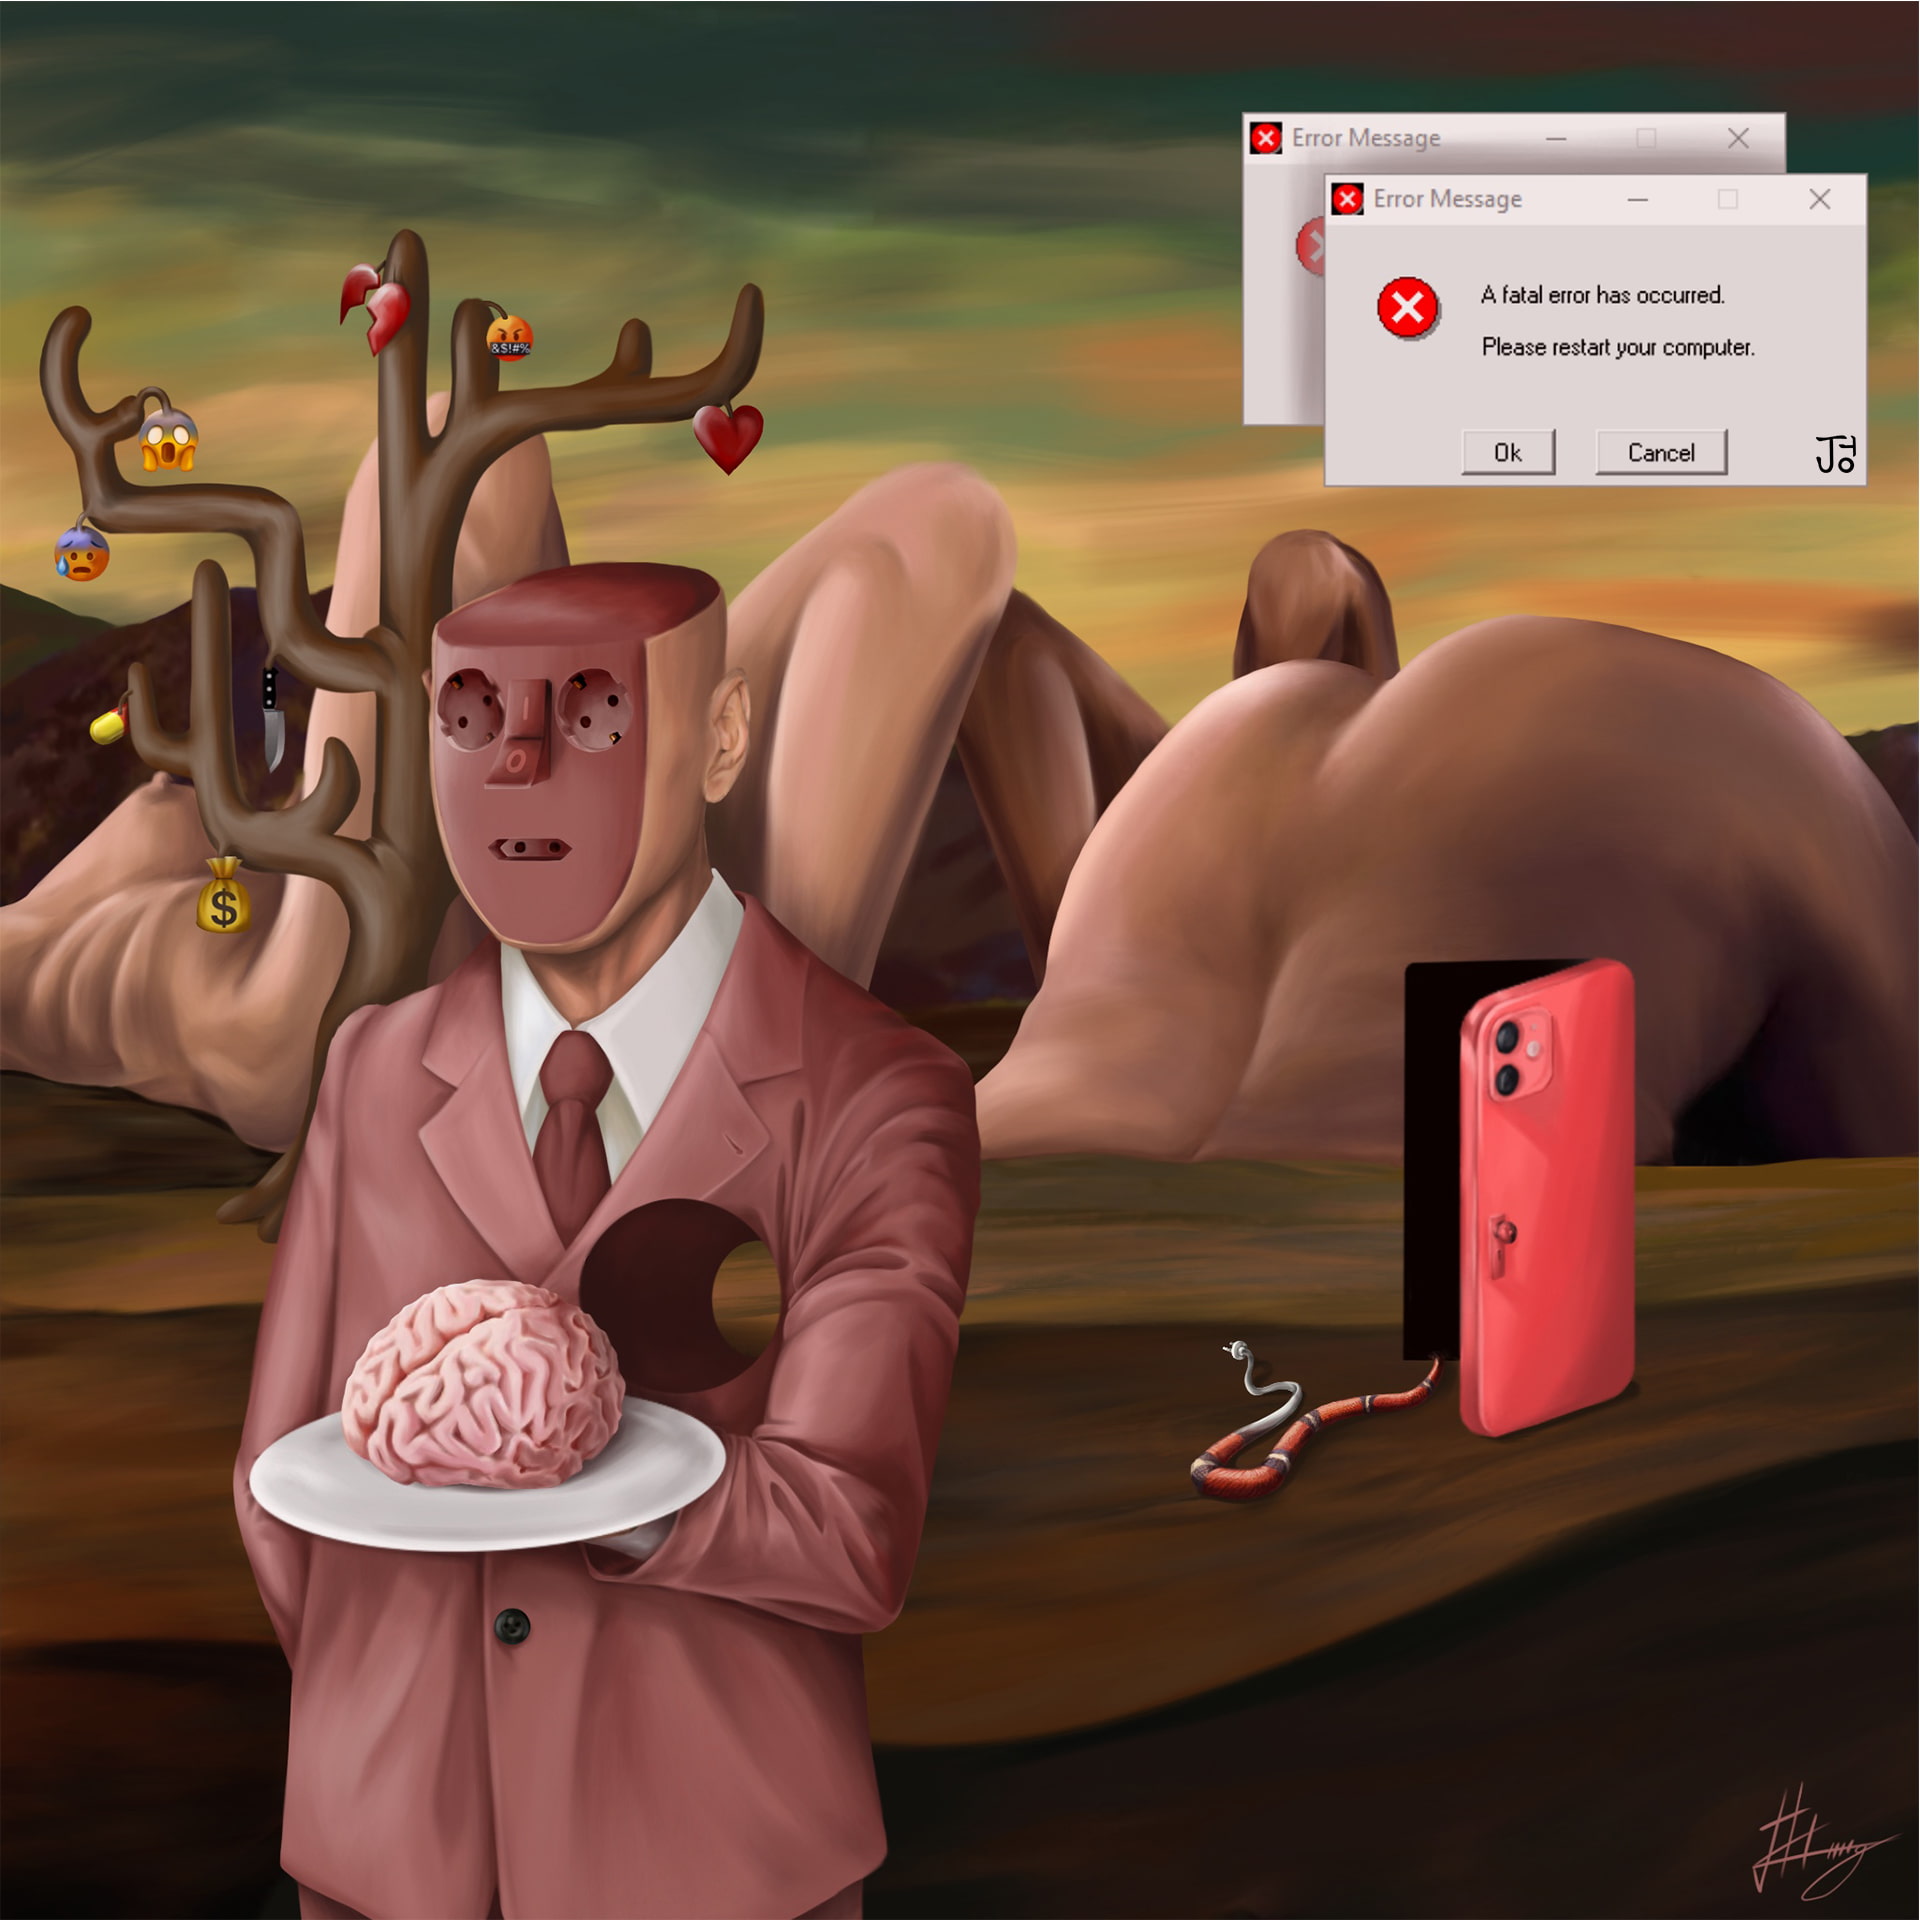 A faceless man with a hole in his chest area is standing in a waiter's posture, holding on a plate with his brain on it. He is in a world with mountains in shapes of naked human bodies, a tree with emojis as its fruits, and a snake that's half cable line. The gate to this world is a door that looks like a digital phone. 